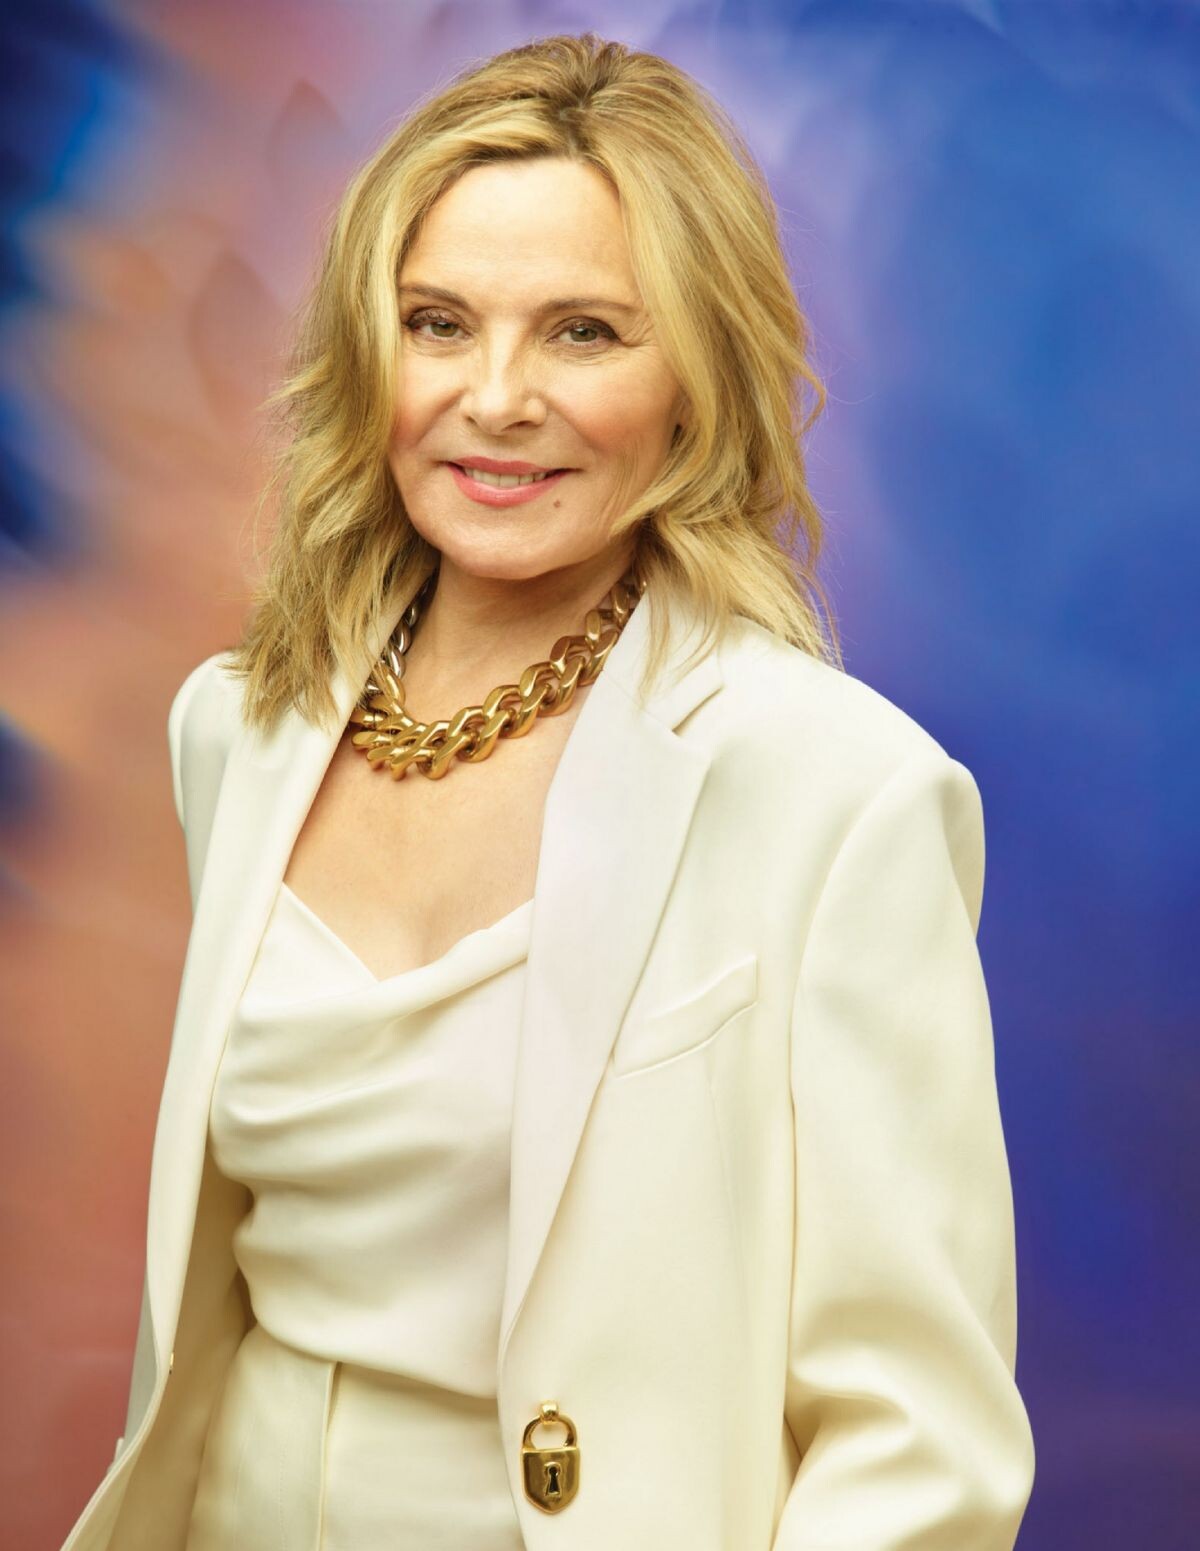 Kim Cattrall photo 218 of 218 pics, wallpaper - photo #1328503 - ThePlace2